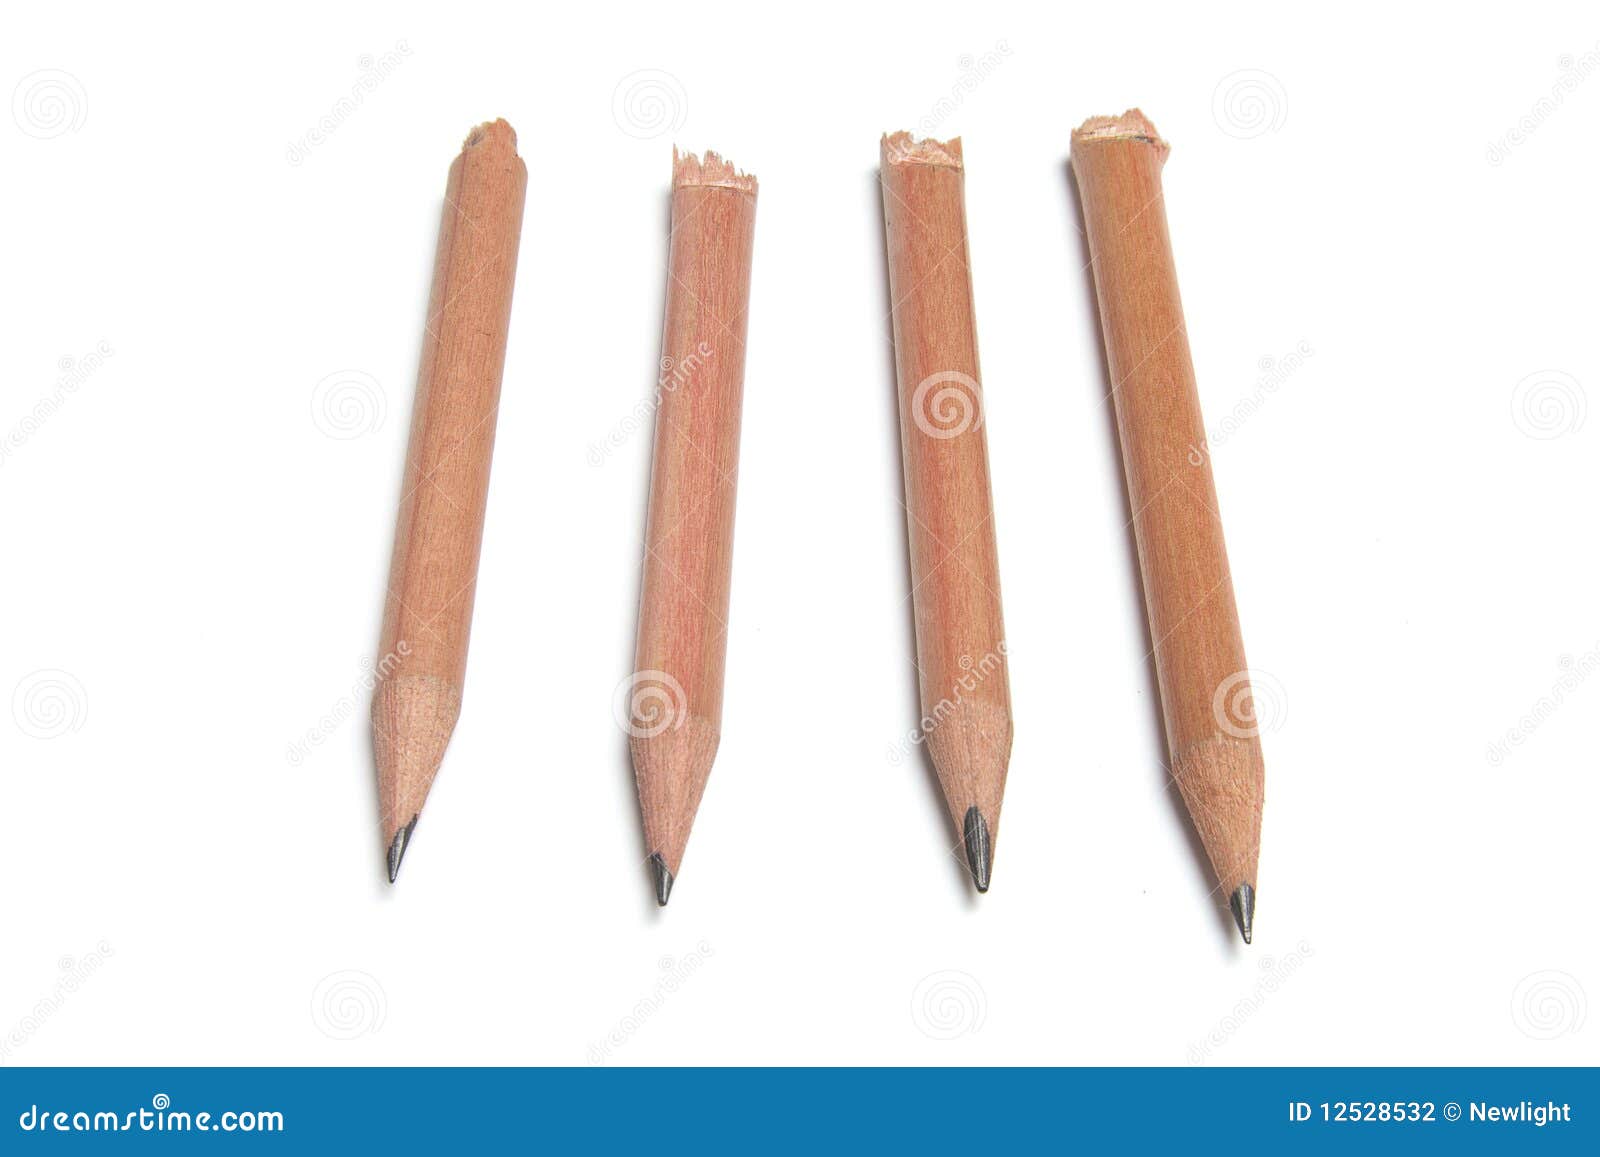 Pencils with Broken Ends stock photo. Image of cutout - 12528532